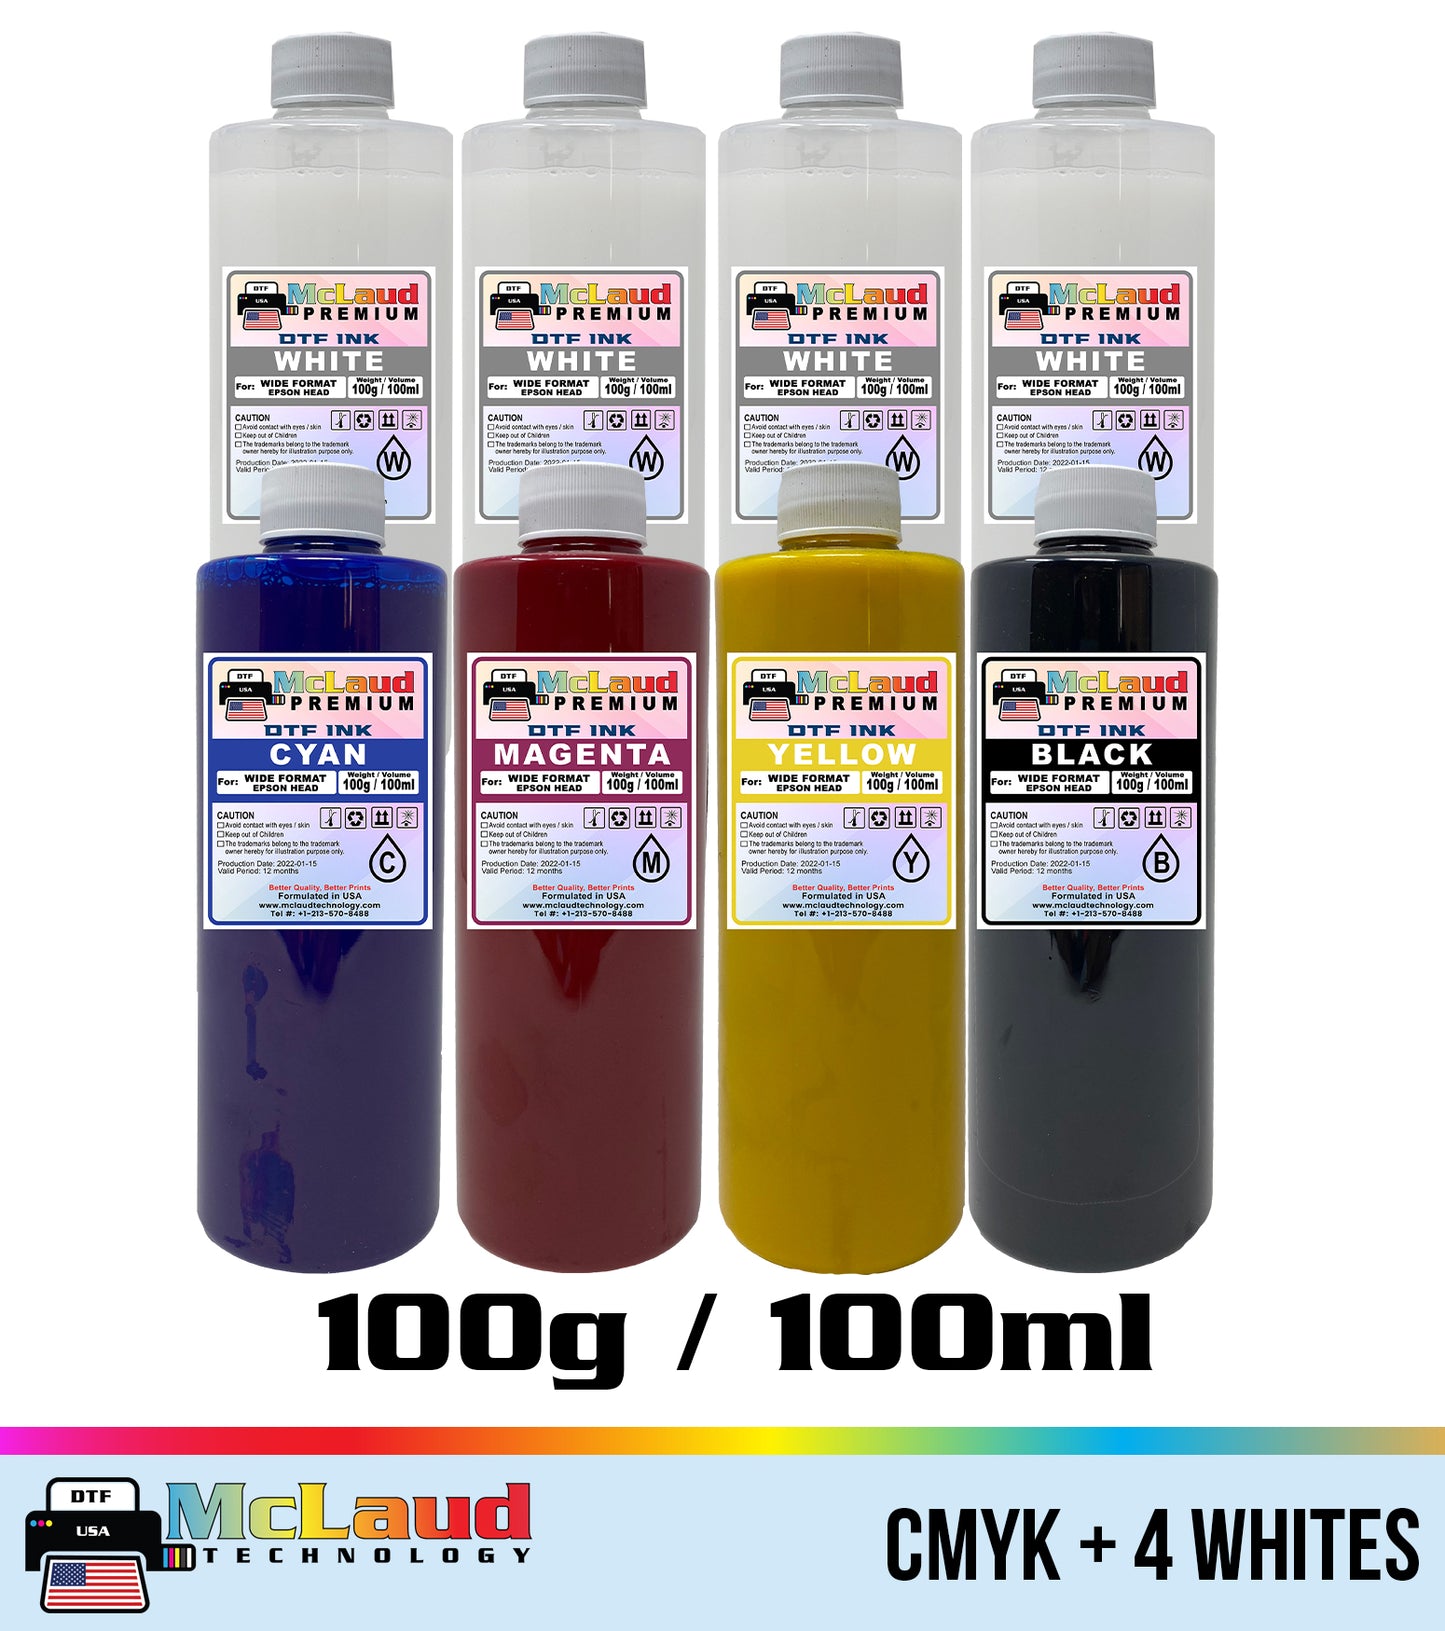 Mclaud Premium DTF Ink, Formulated in USA